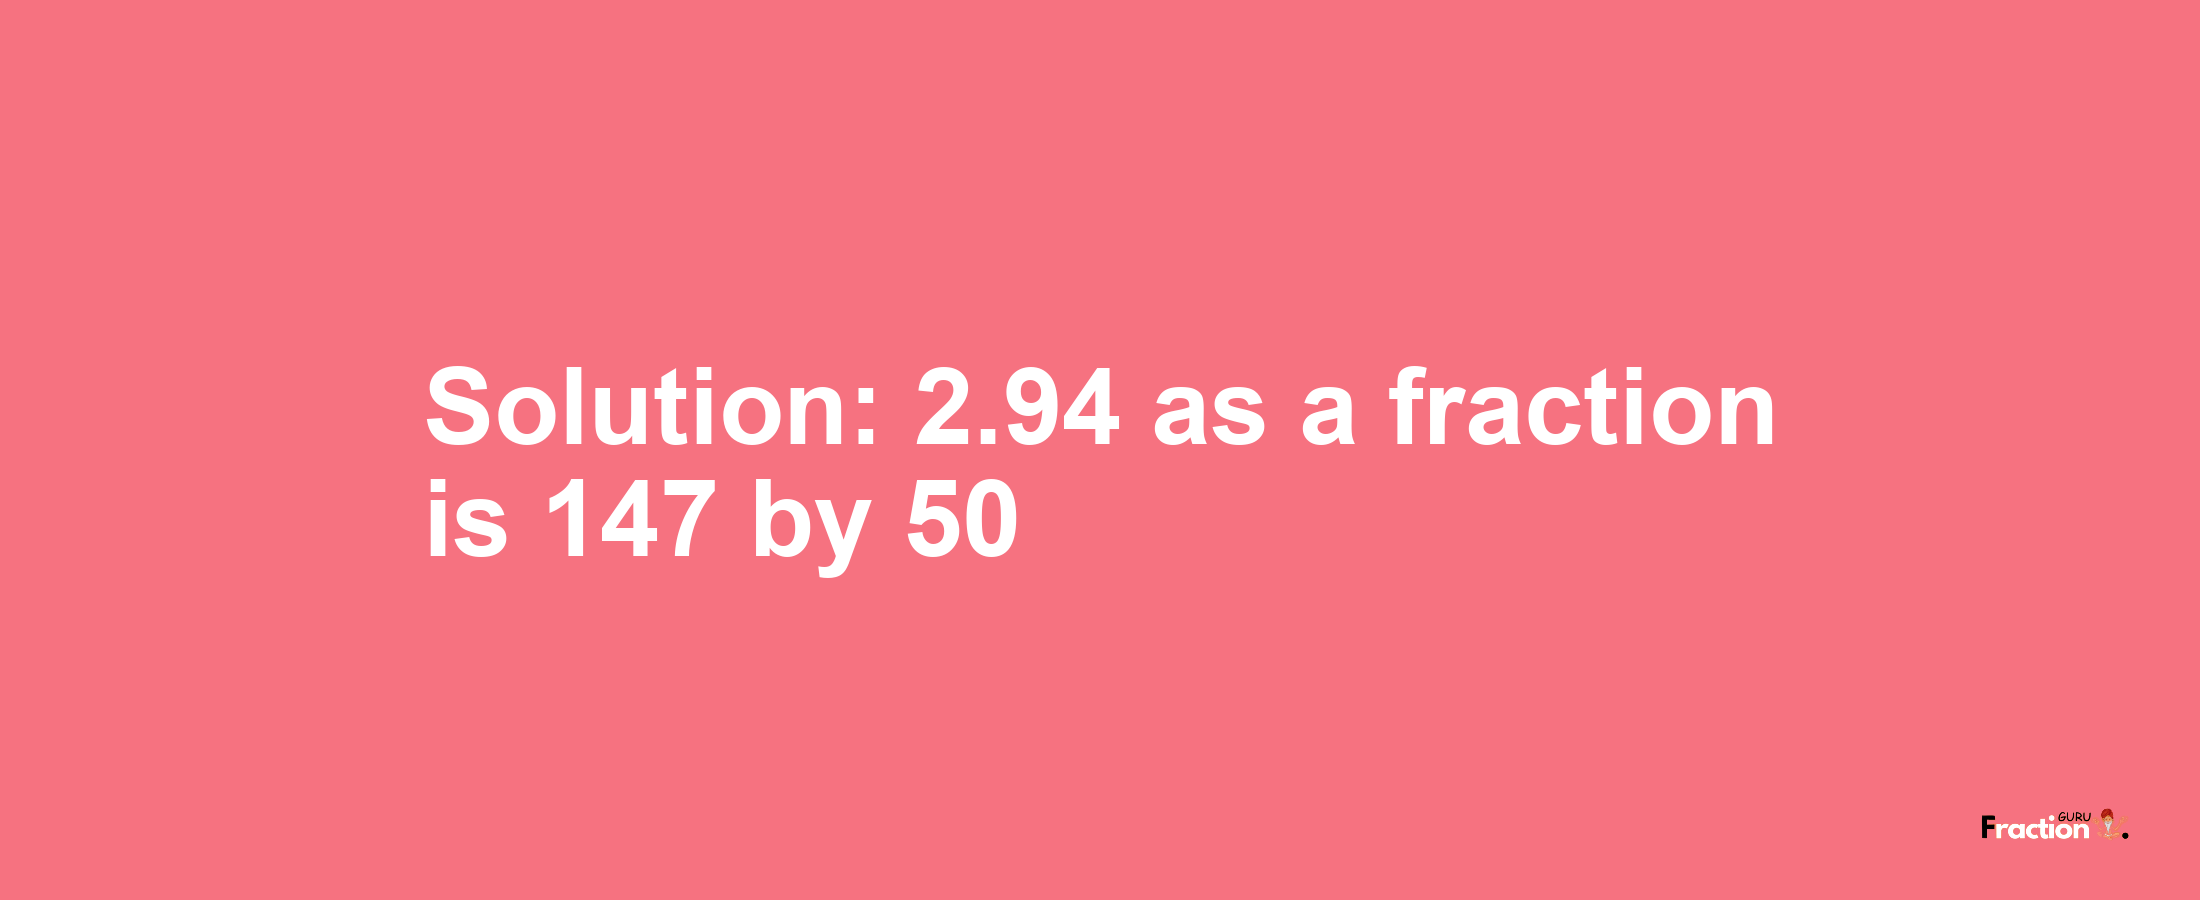 Solution:2.94 as a fraction is 147/50